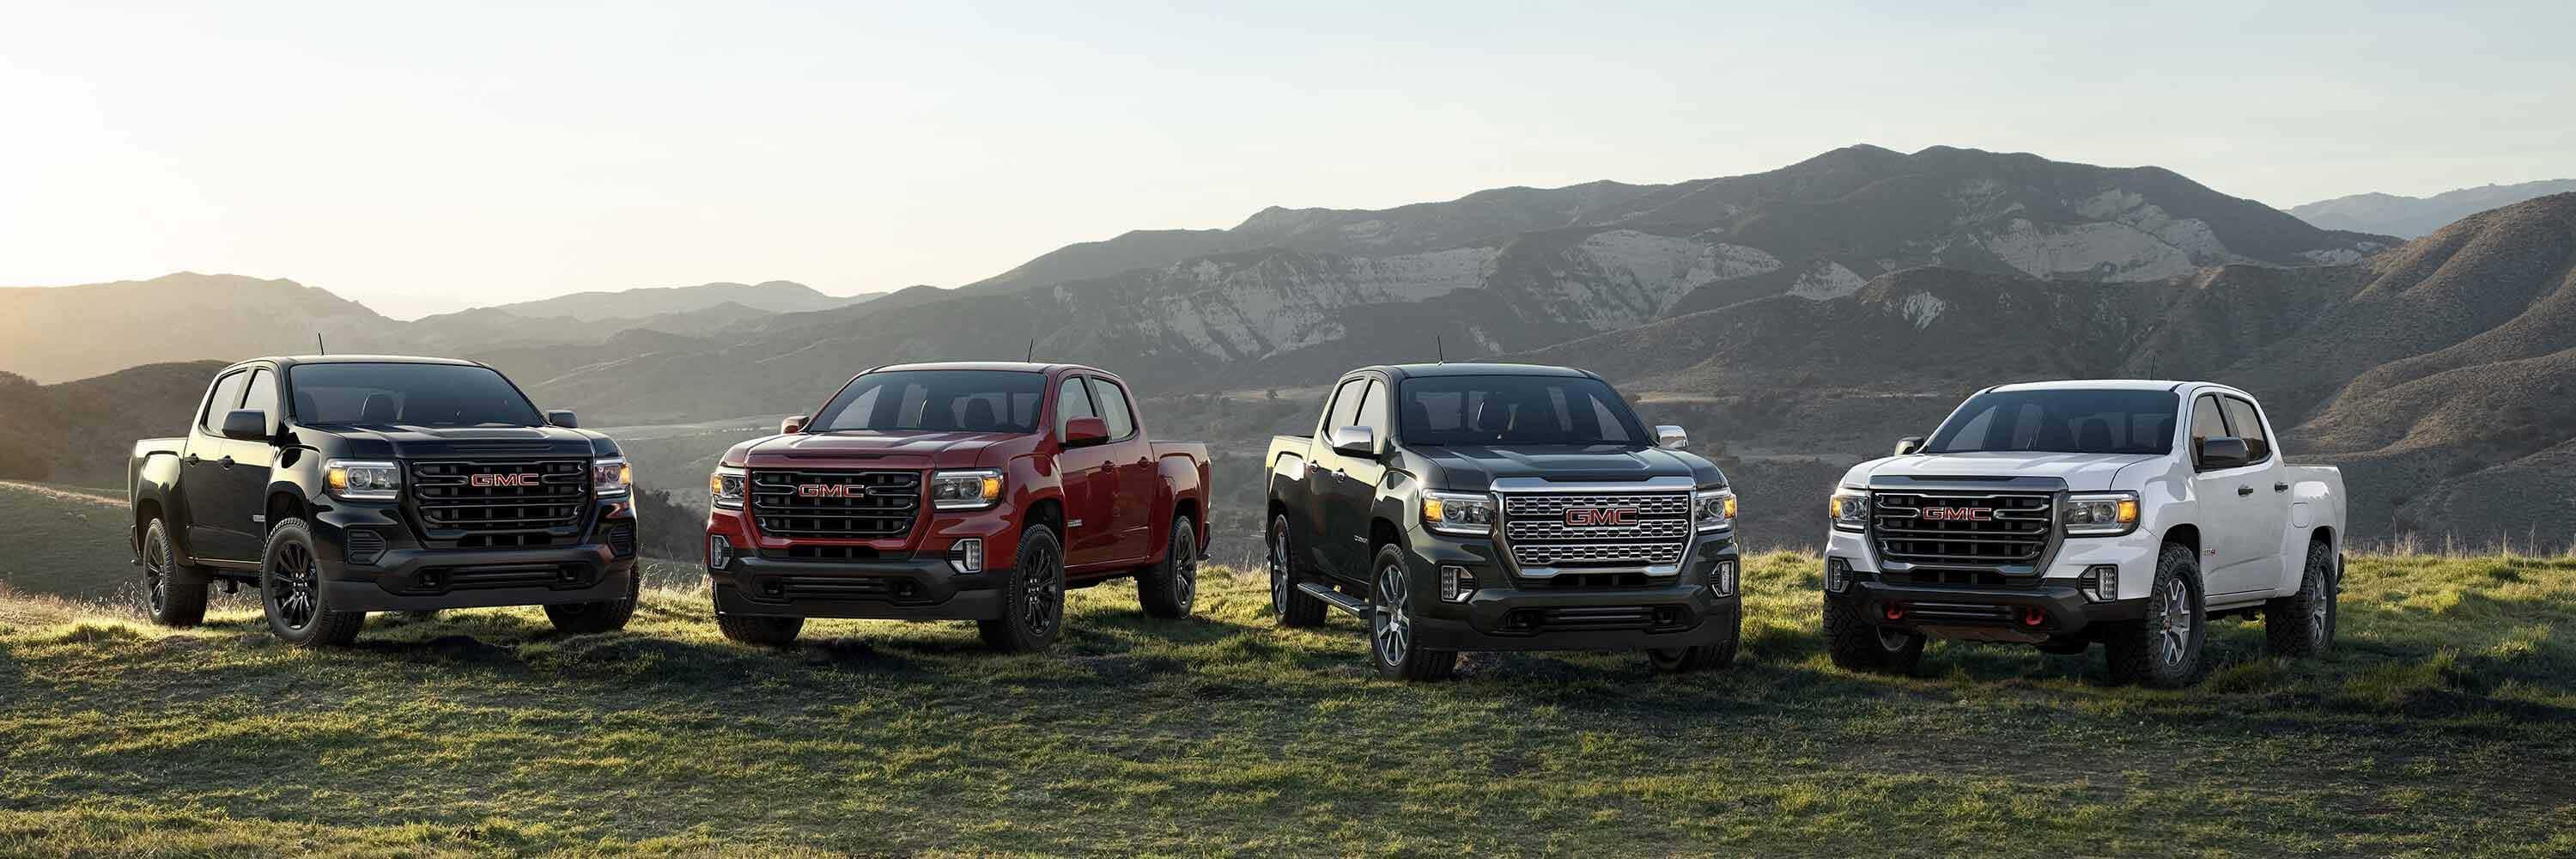 GMC Canyon Trucks parked in front of mountain